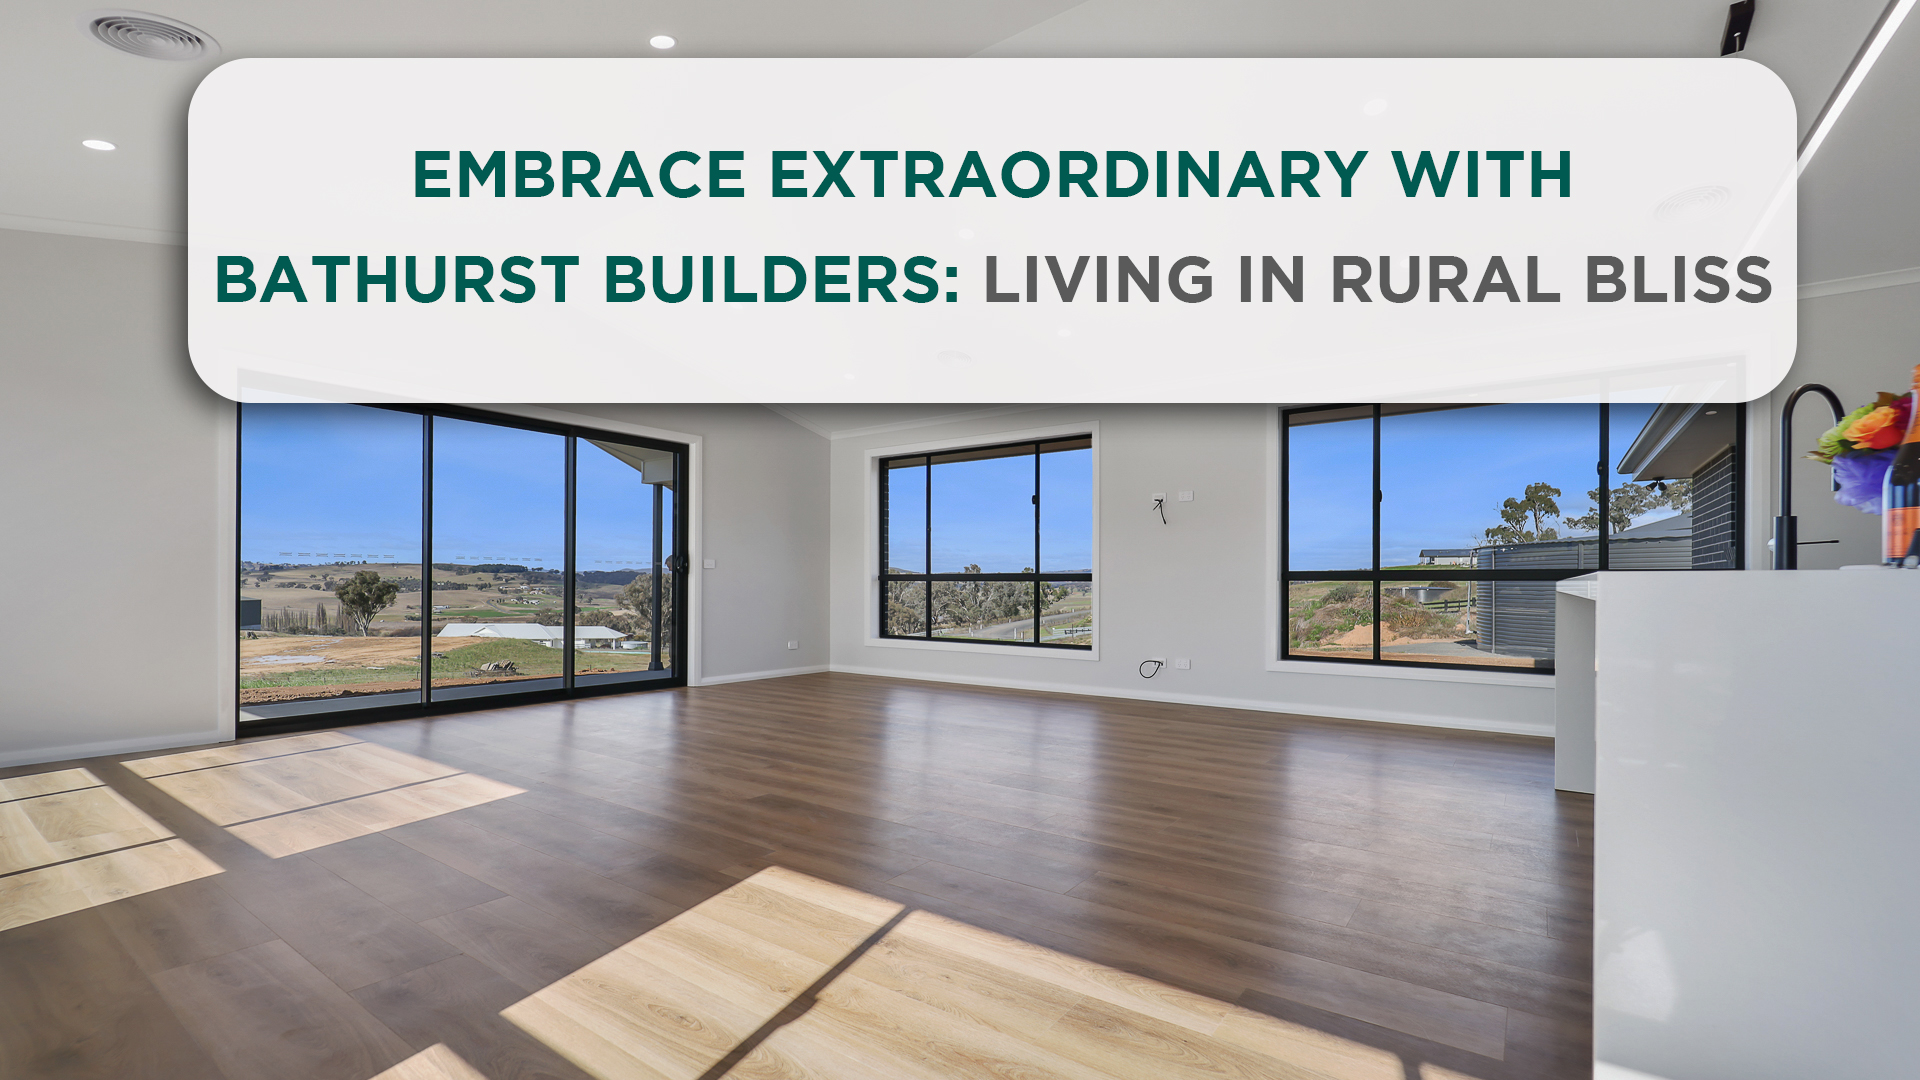 Embrace Extraordinary with Bathurst Builders: Living in Rural Bliss